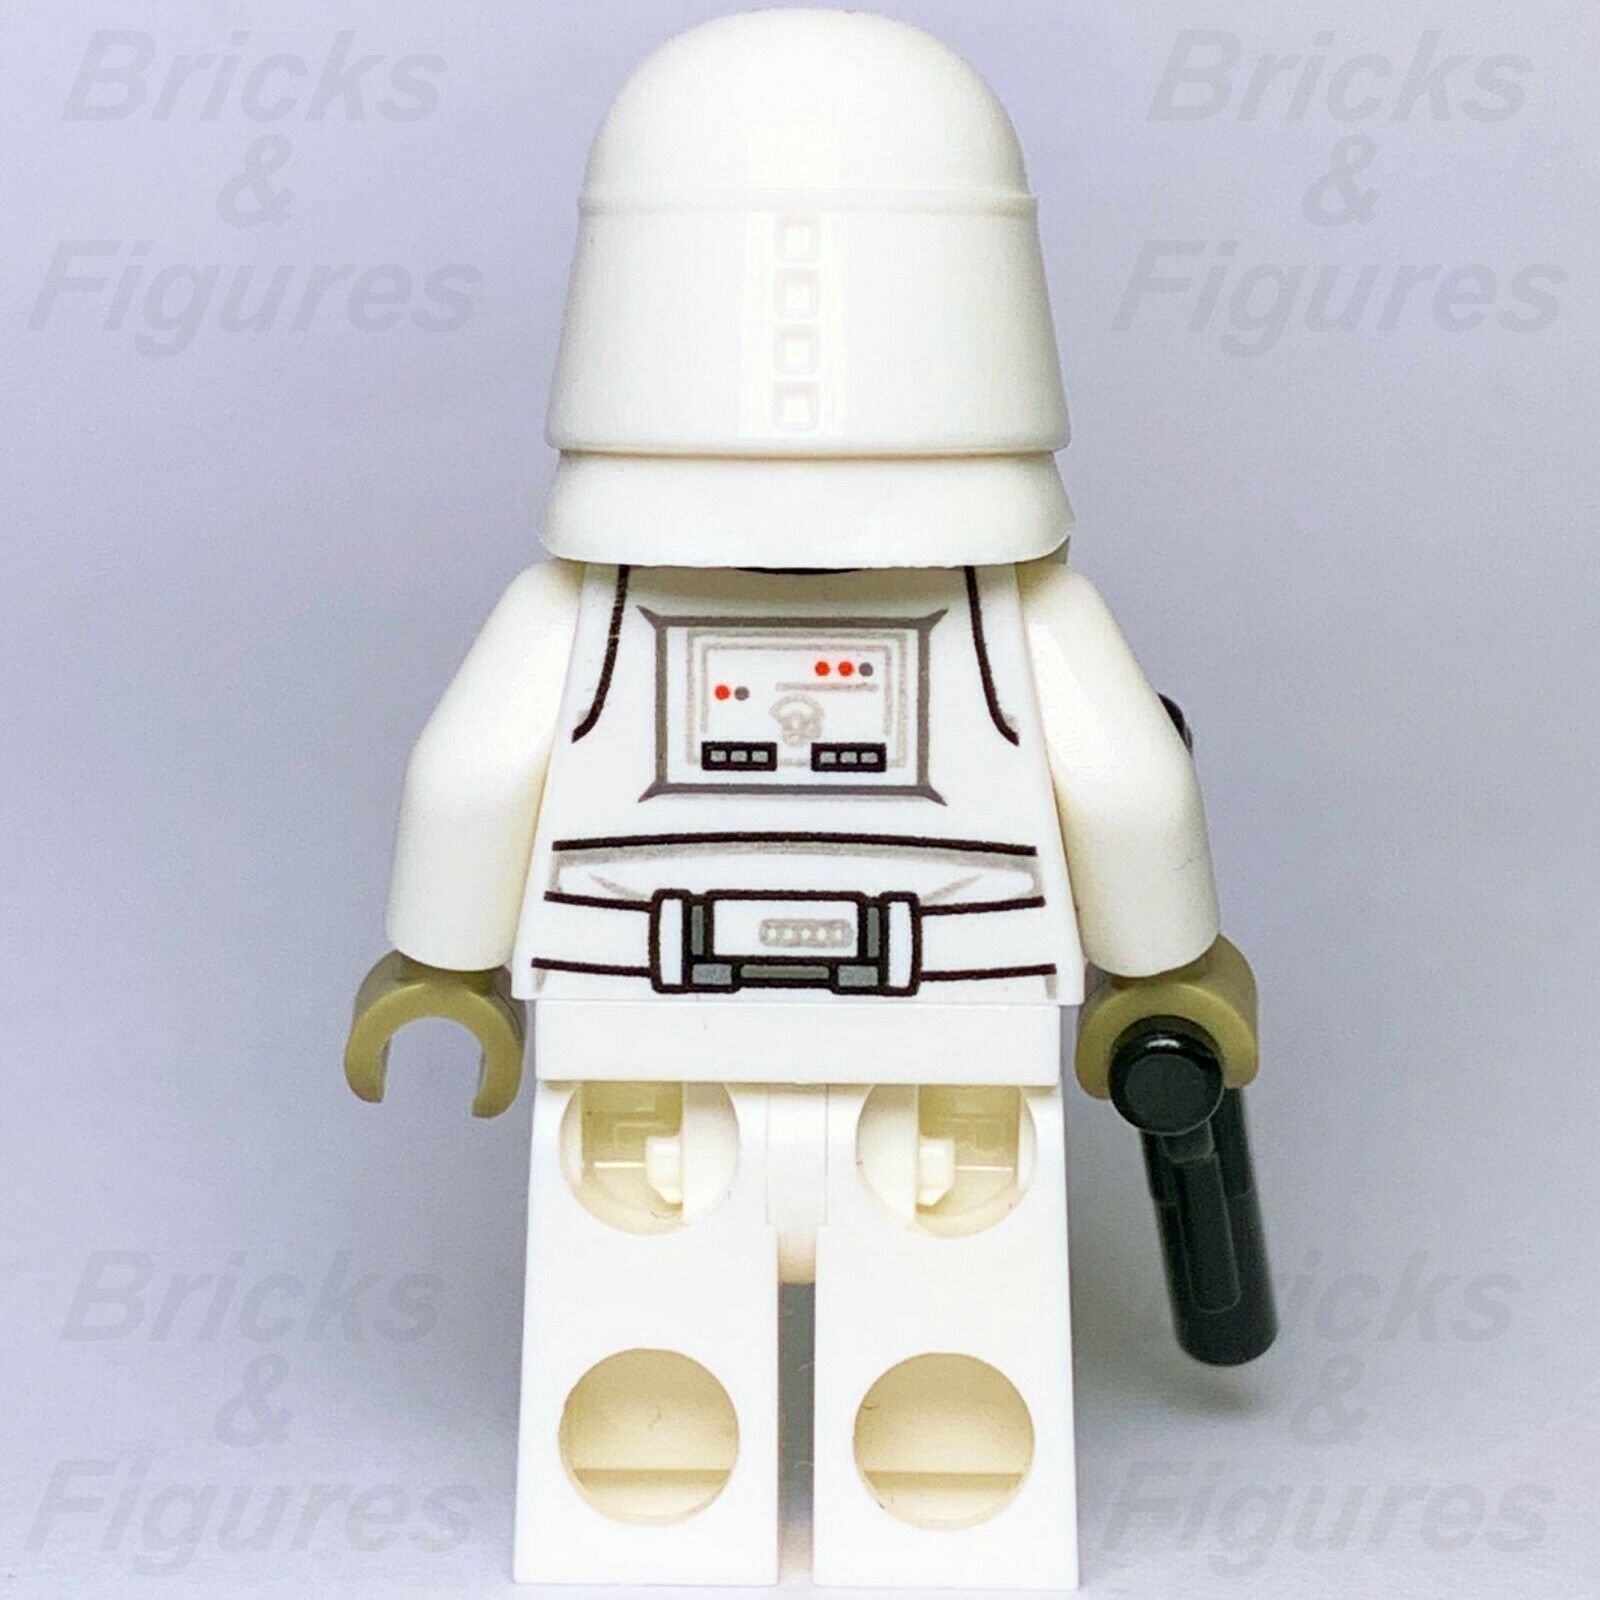 New Star Wars LEGO Hoth Snowtrooper Imperial Minifigure from Sets 75241 75239 - Bricks & Figures